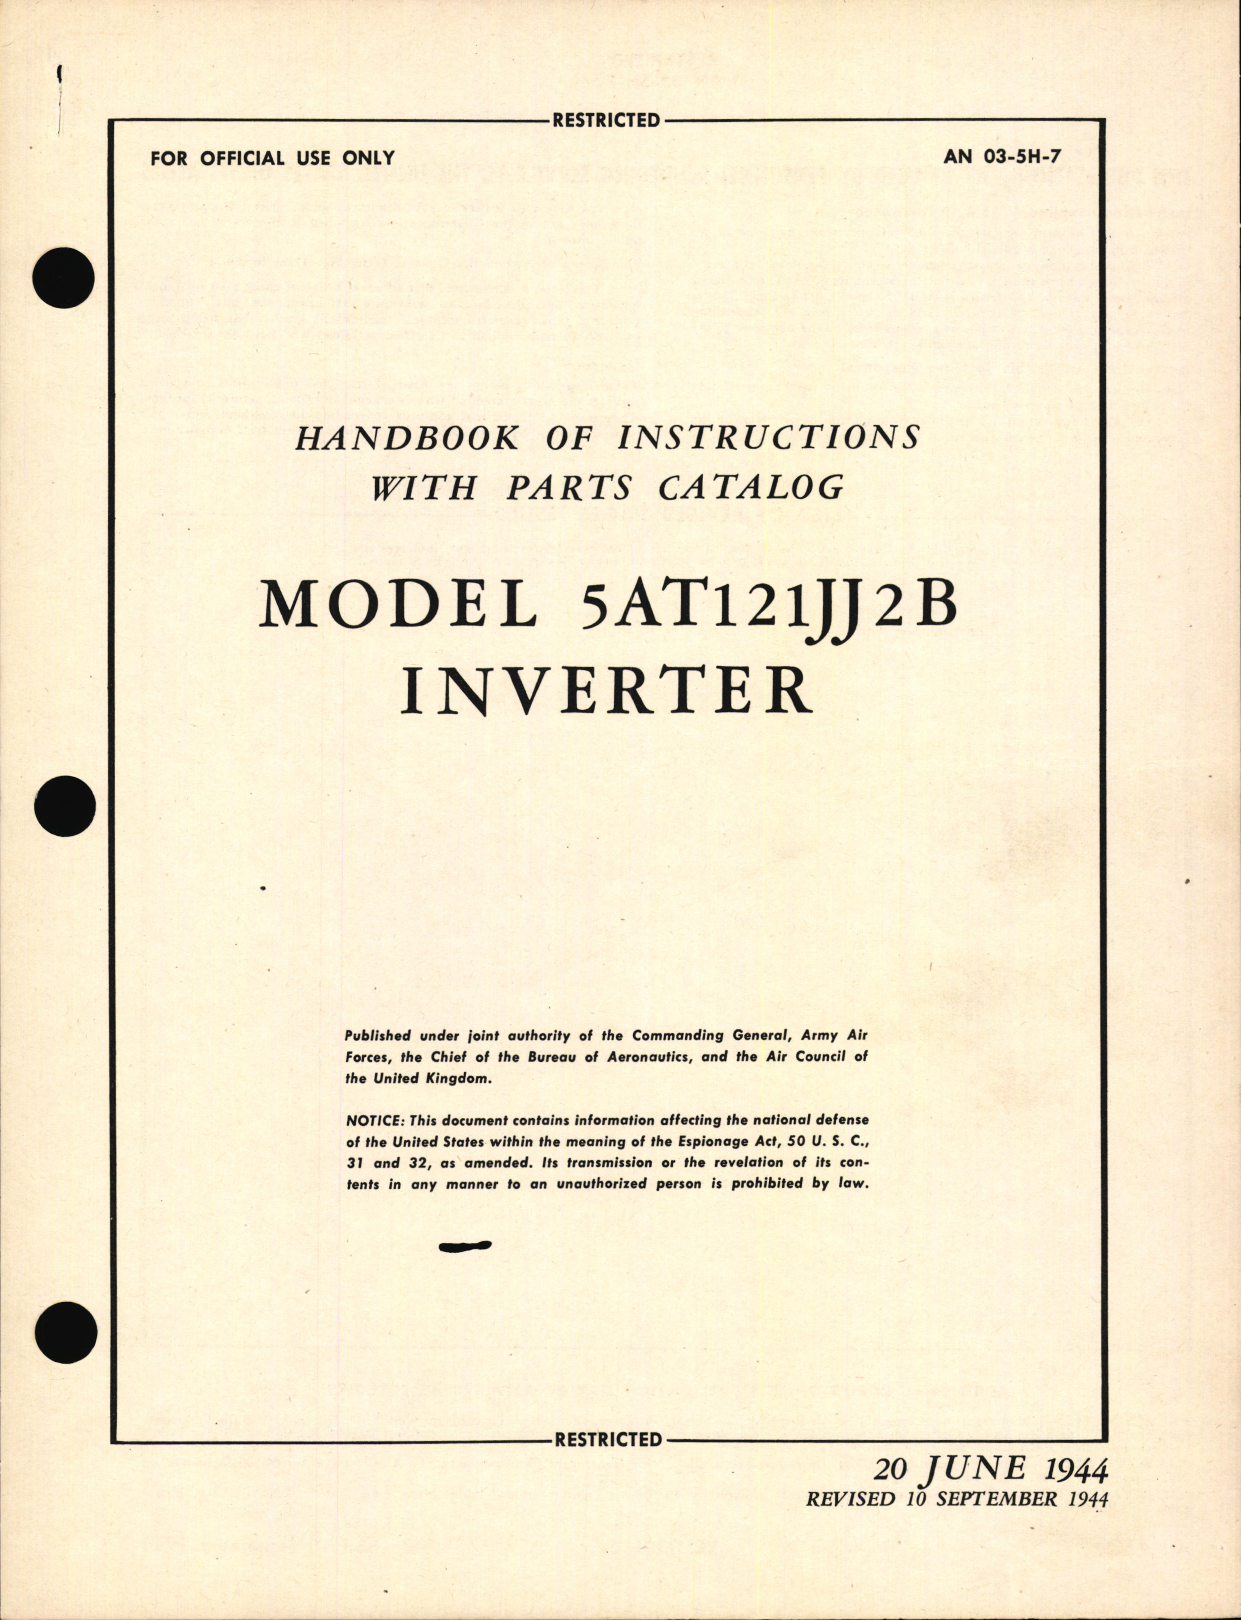 Sample page 1 from AirCorps Library document: Handbook of Instructions with Parts Catalog for Model 5AT121JJ2B Inverter